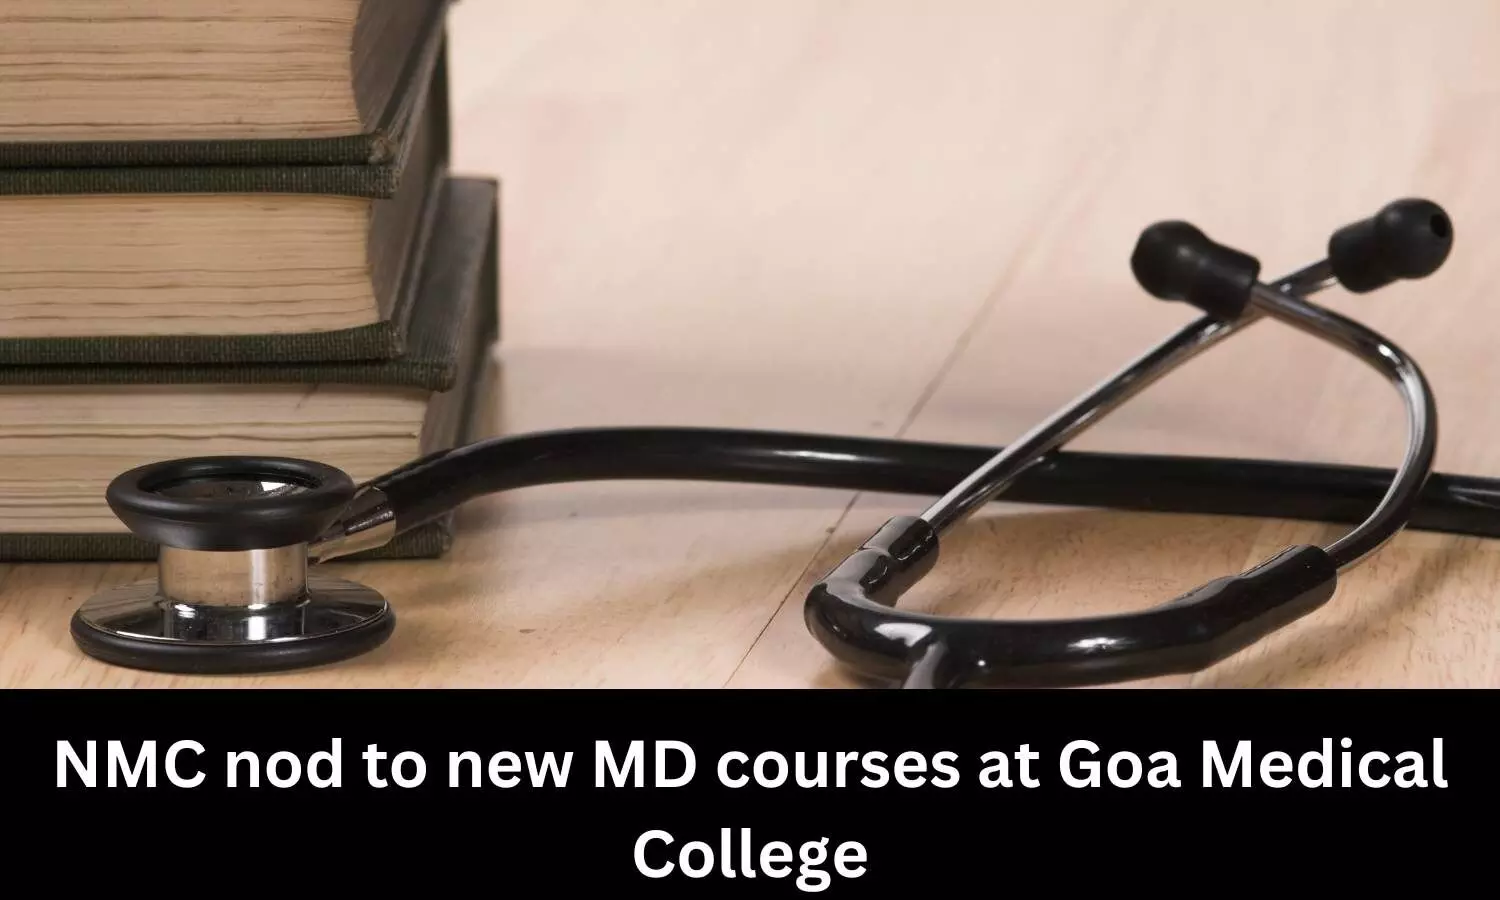 Goa Medical Medical College gets NMC nod for new MD courses